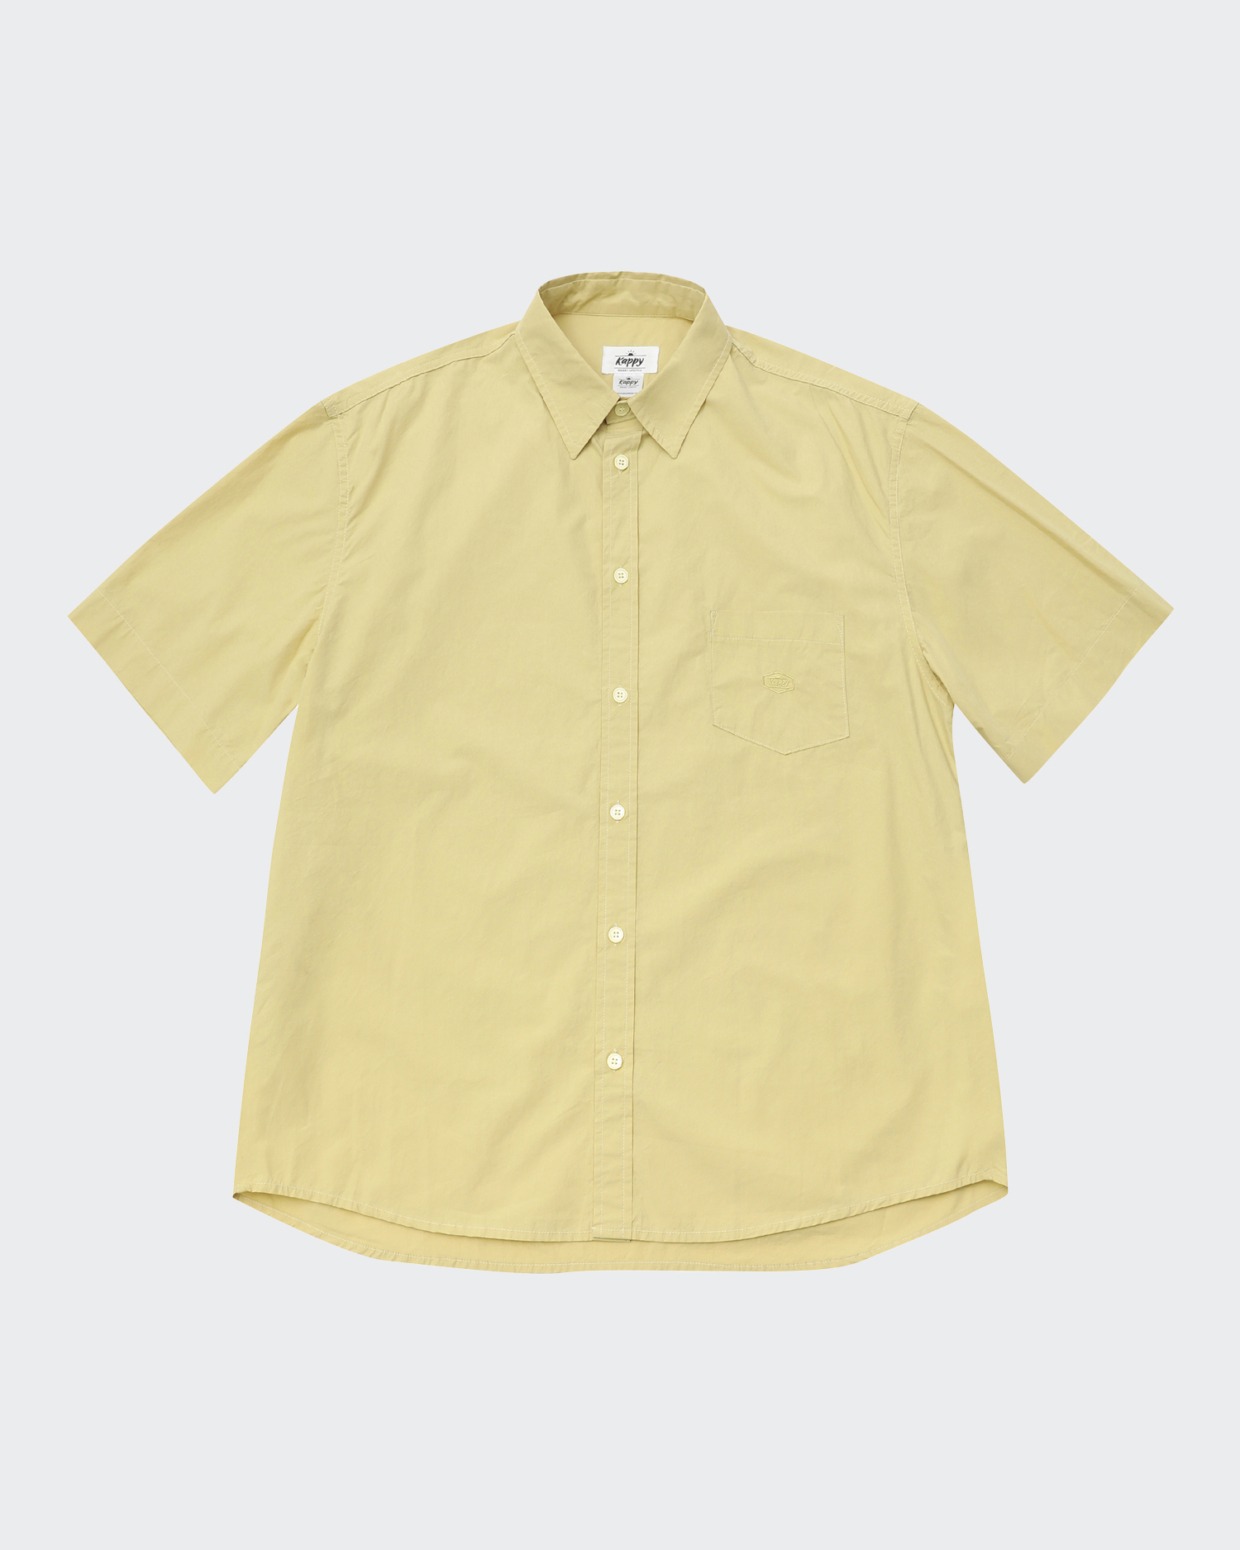 Kappy Relaxed Cotton Half Shirt